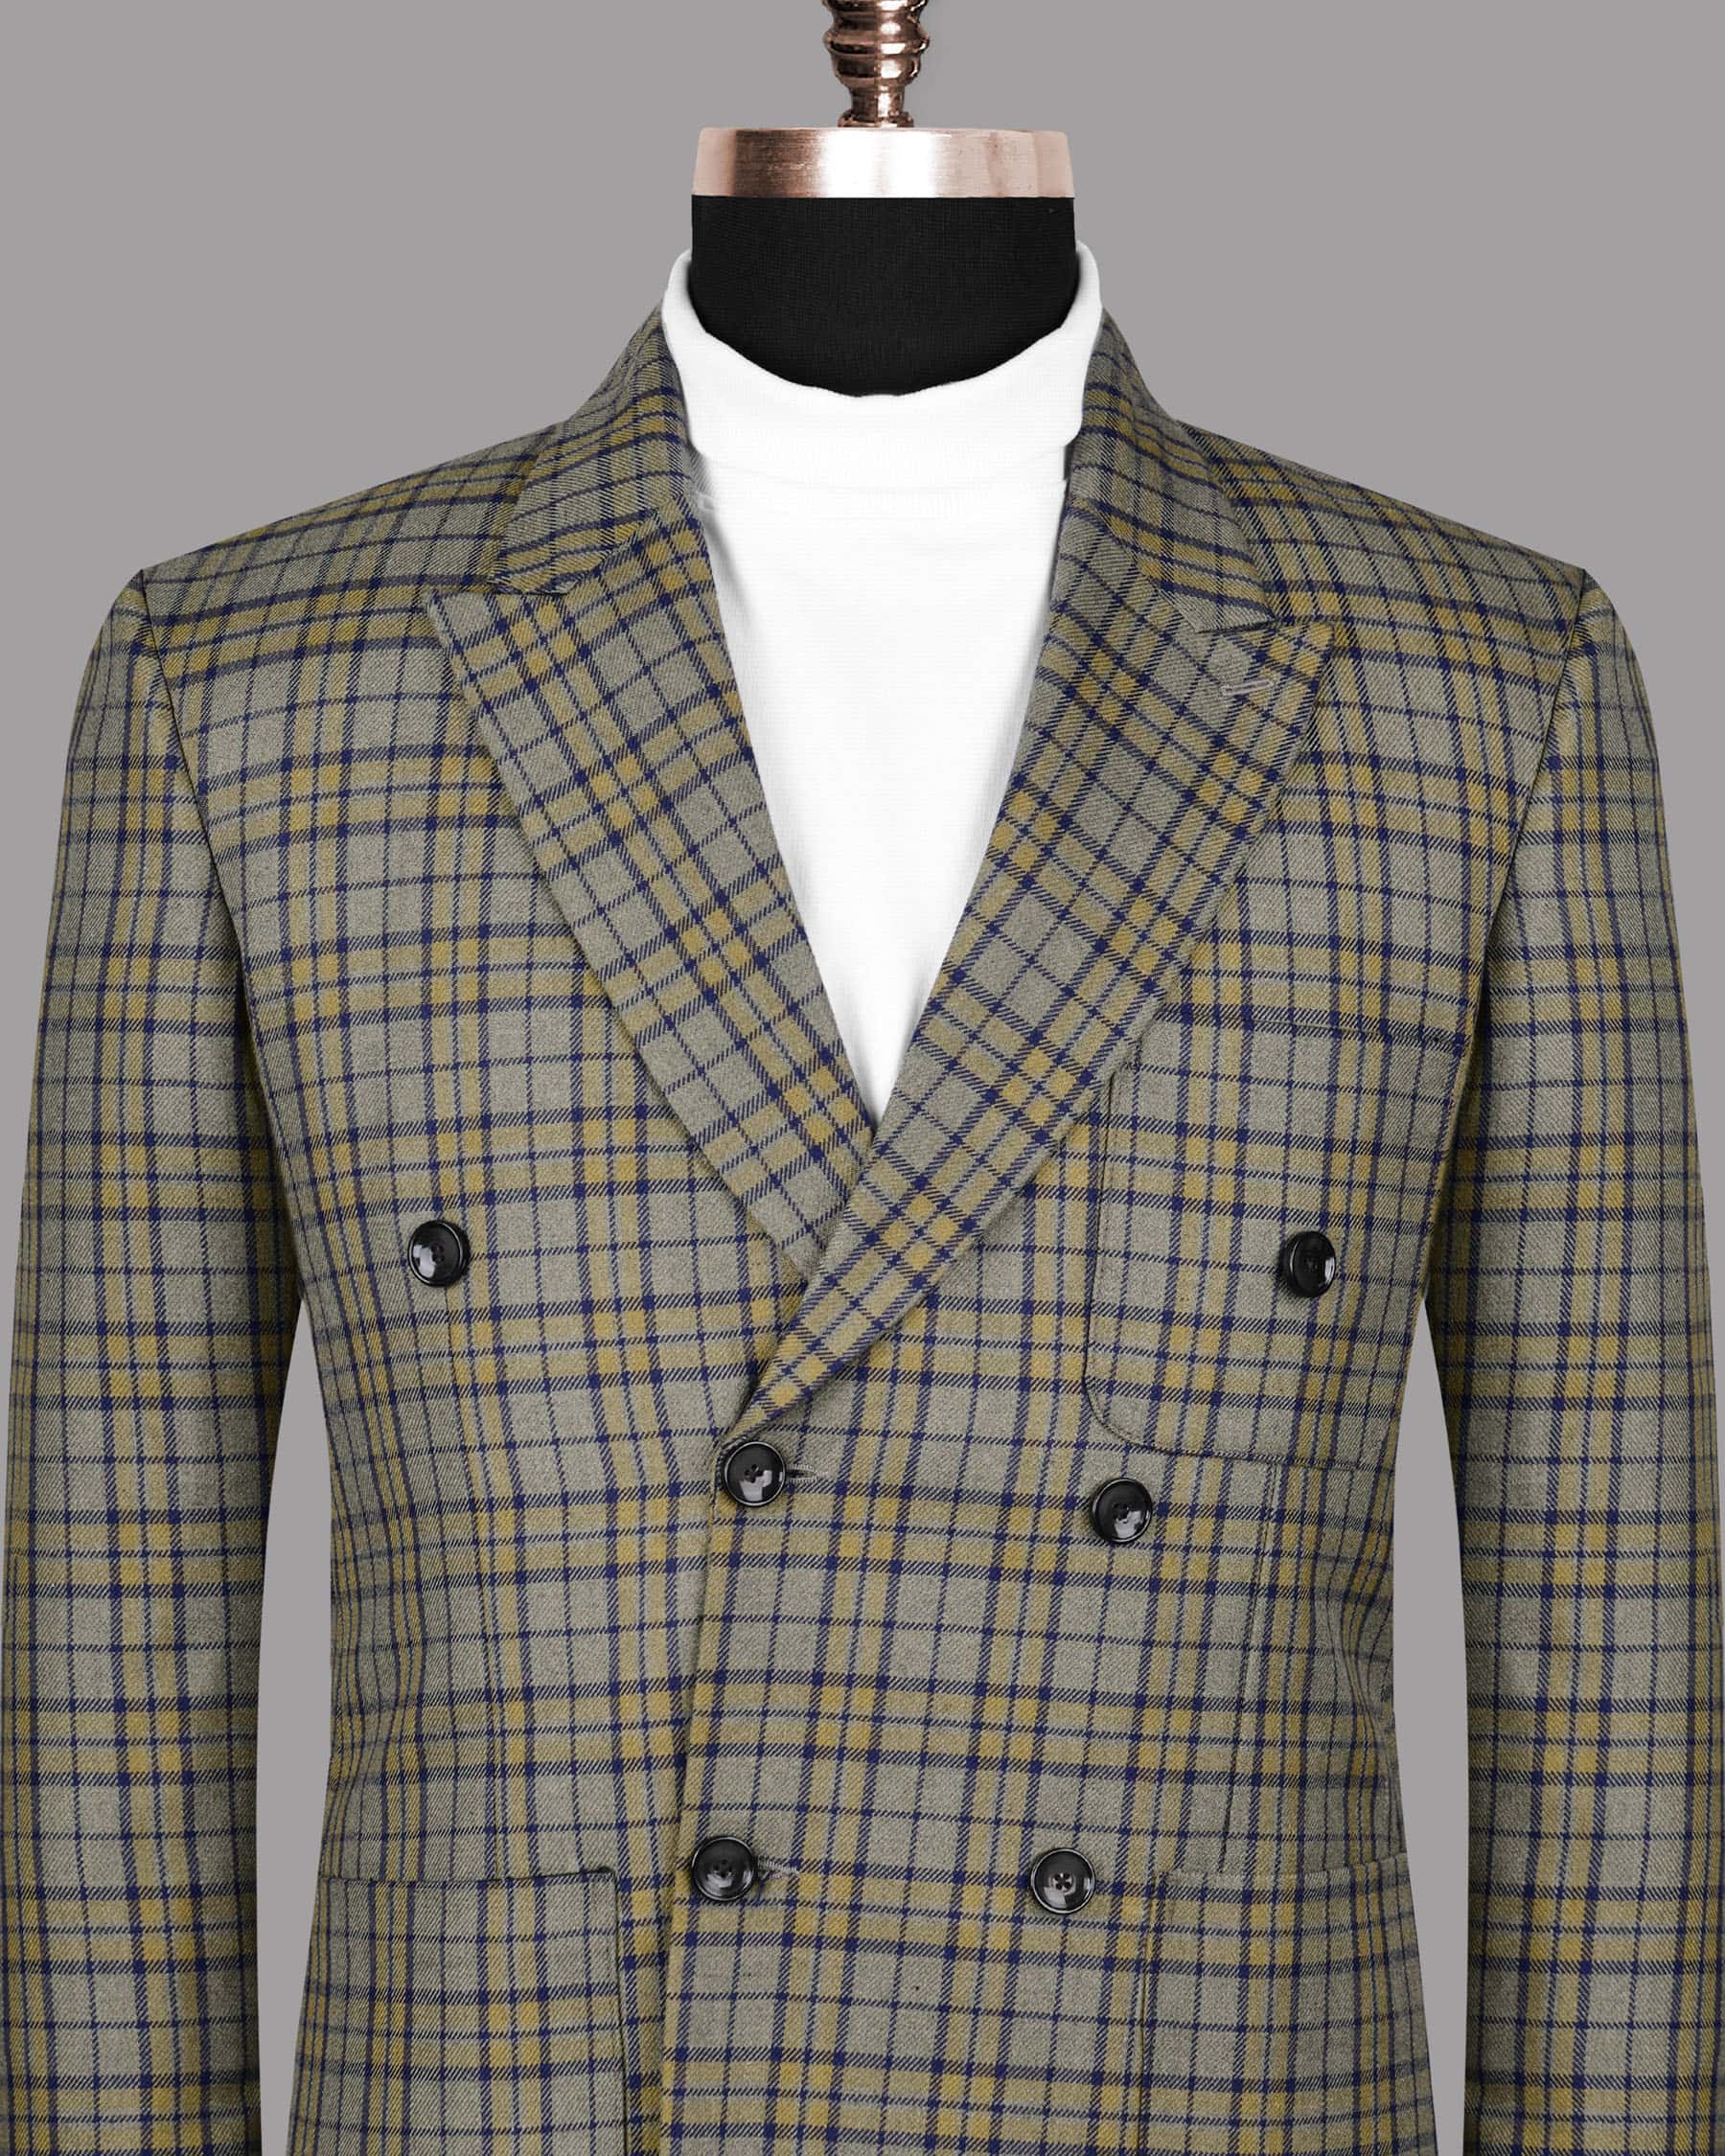 Arrowtown Checked Double Breasted Blazer BL1088-DB-PP-36, BL1088-DB-PP-38, BL1088-DB-PP-40, BL1088-DB-PP-46, BL1088-DB-PP-48, BL1088-DB-PP-50, BL1088-DB-PP-52, BL1088-DB-PP-56, BL1088-DB-PP-58, BL1088-DB-PP-60, BL1088-DB-PP-42, BL1088-DB-PP-44, BL1088-DB-PP-54